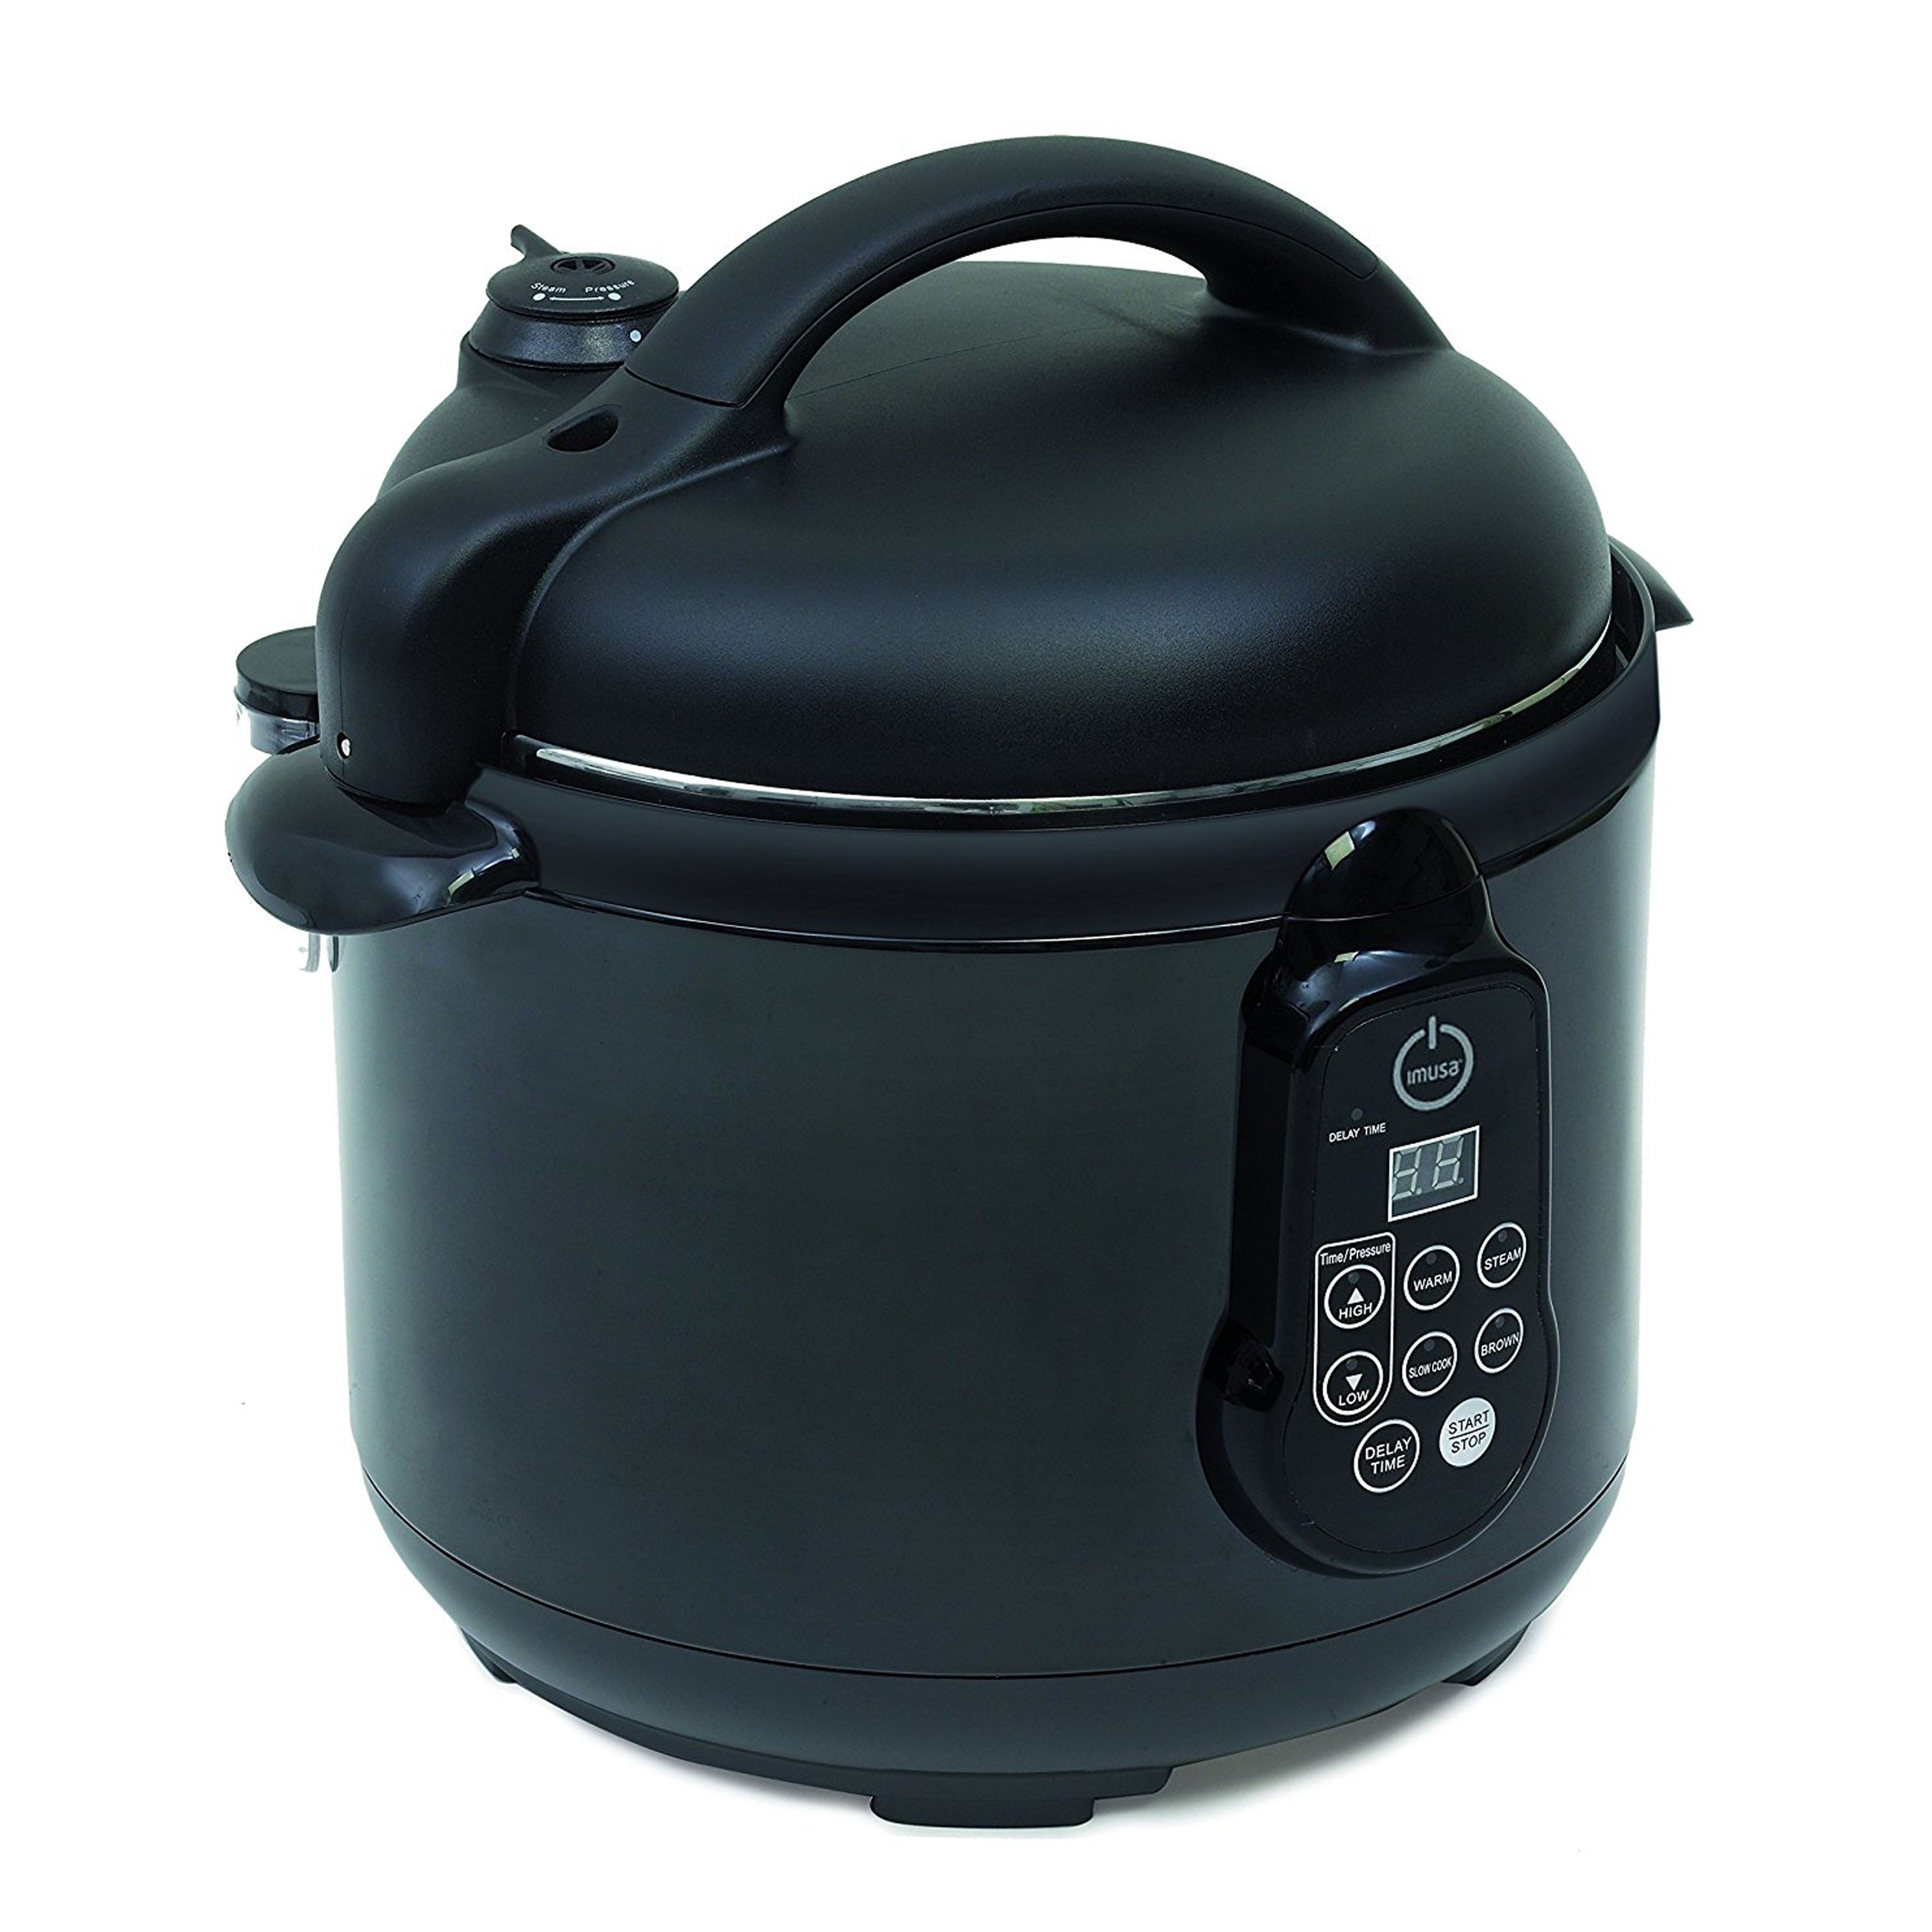 The Pioneer Woman Instant Pots are on sale at Walmart just in time